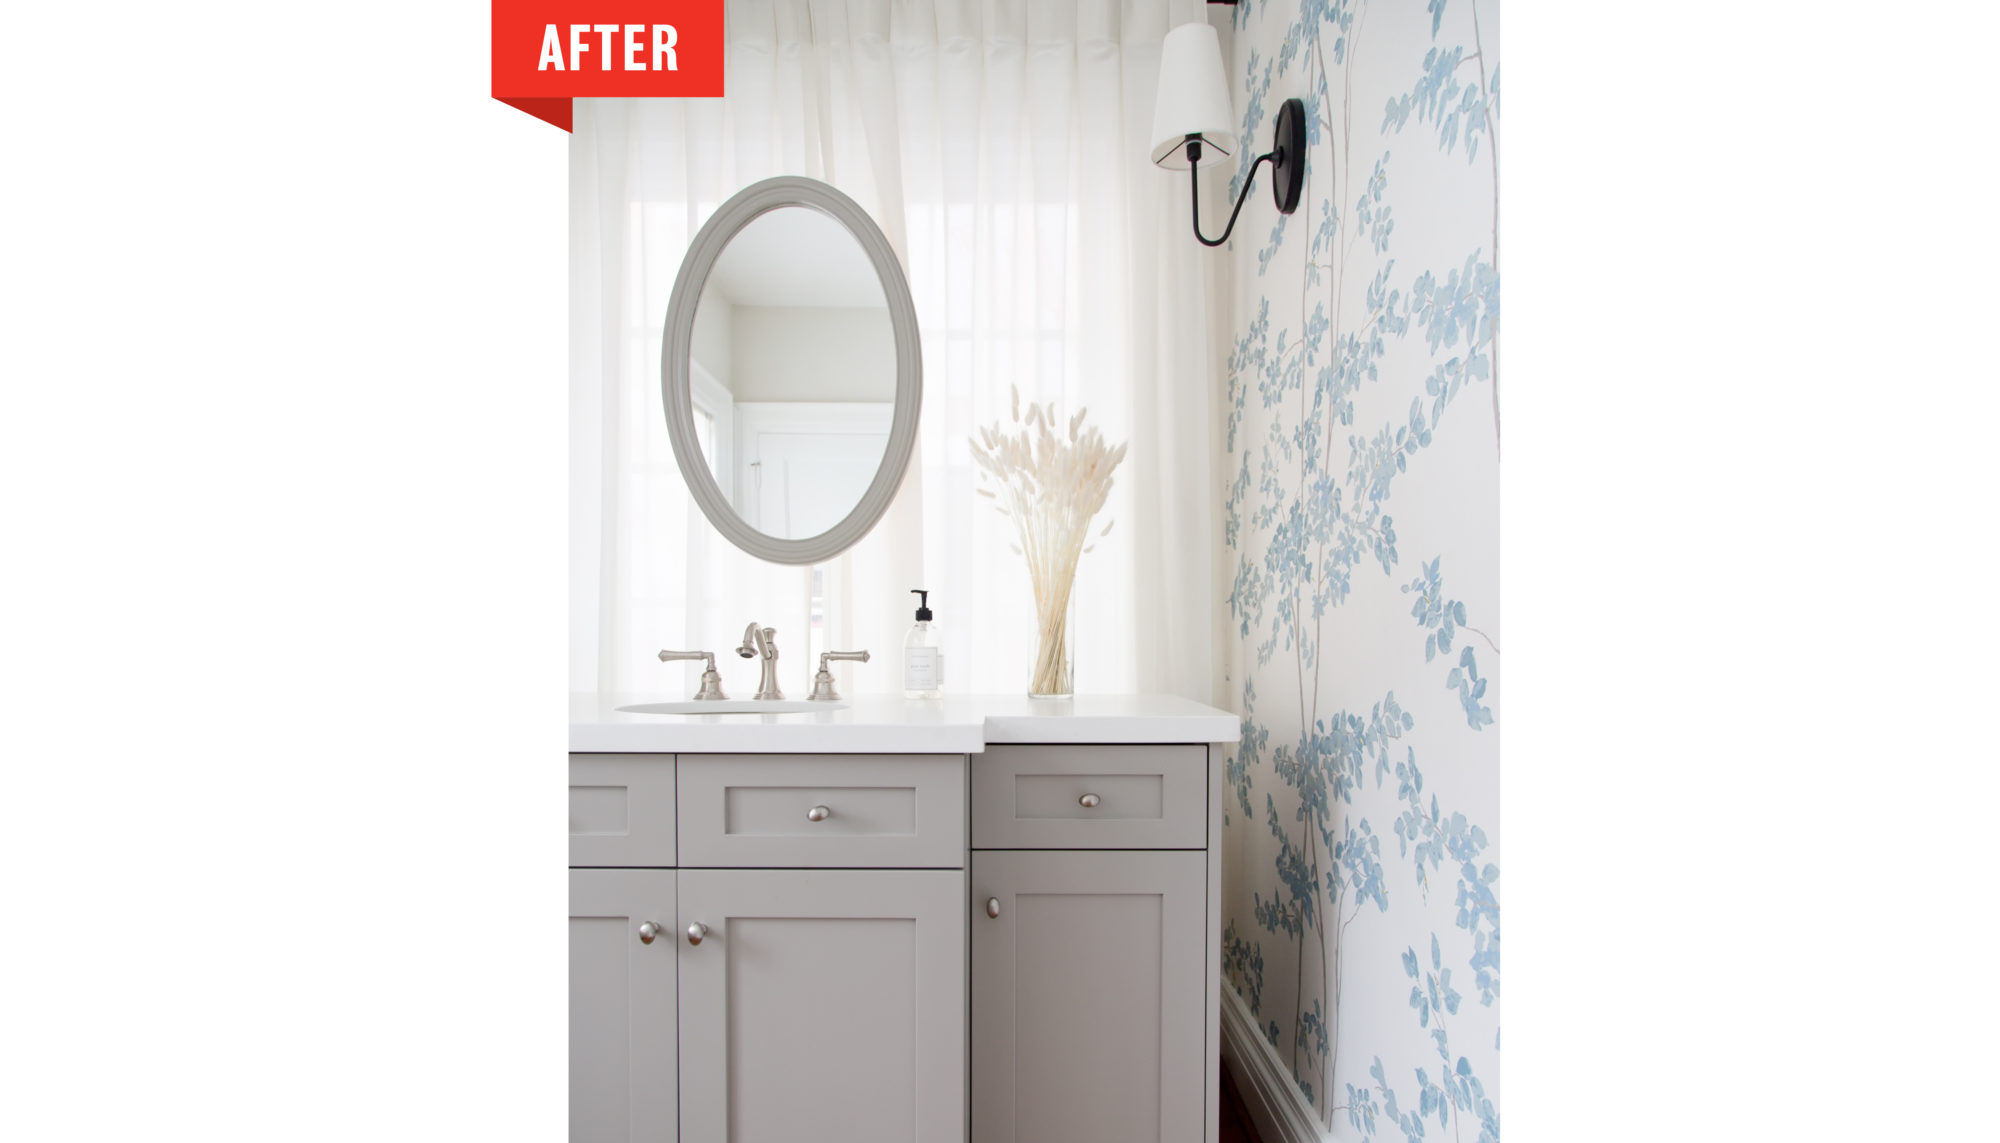 The new powder room is all about bright lighting and floral motifs. 